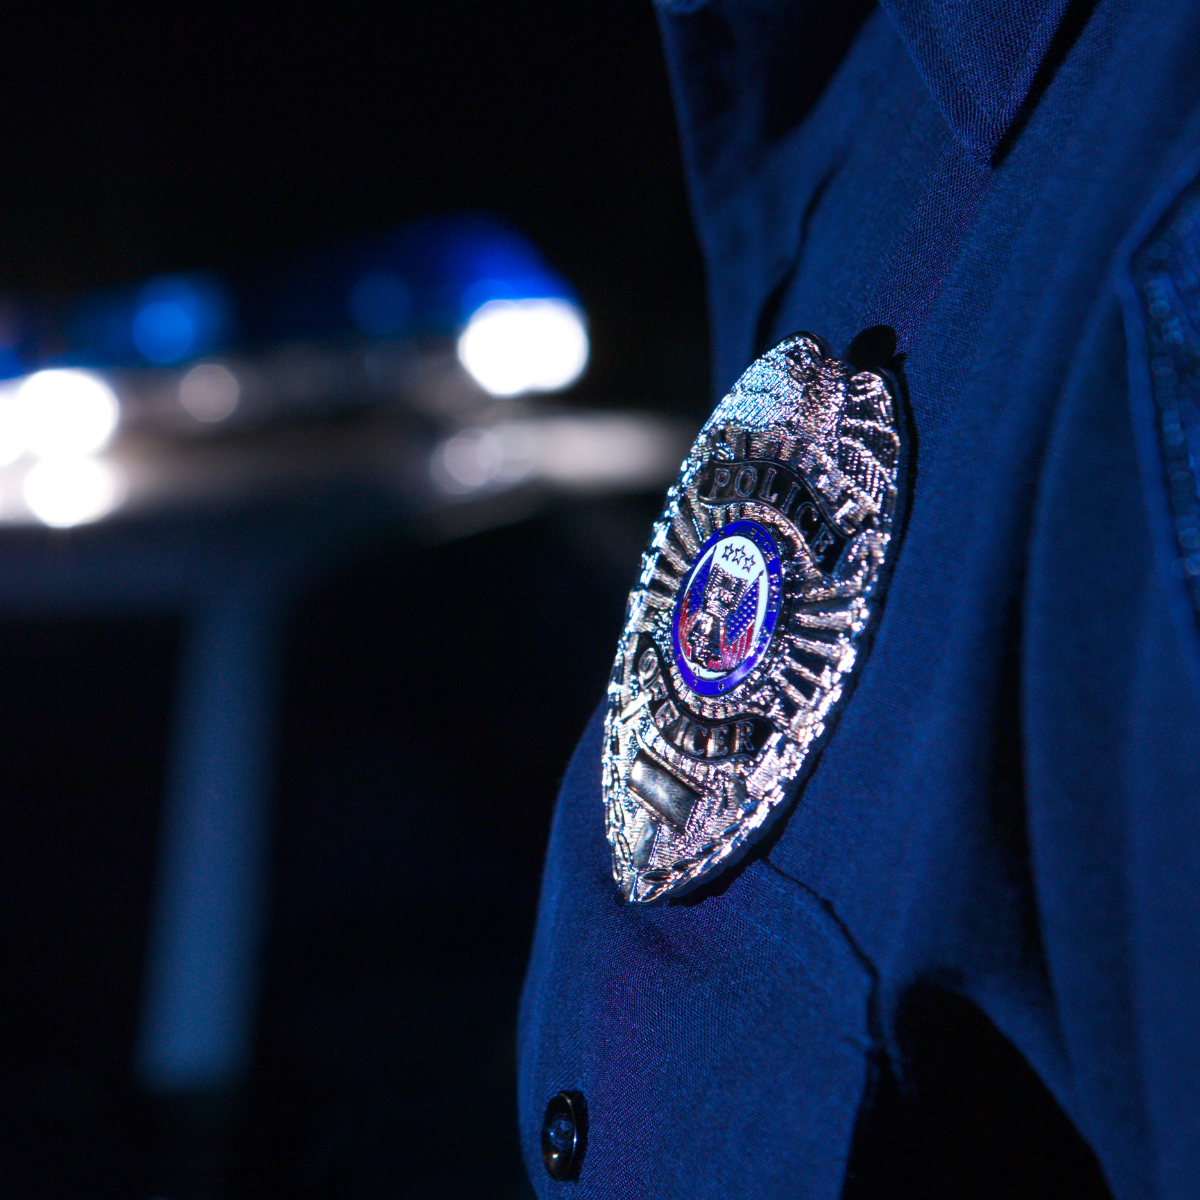 Thousands of California cops could lose their badges under new law